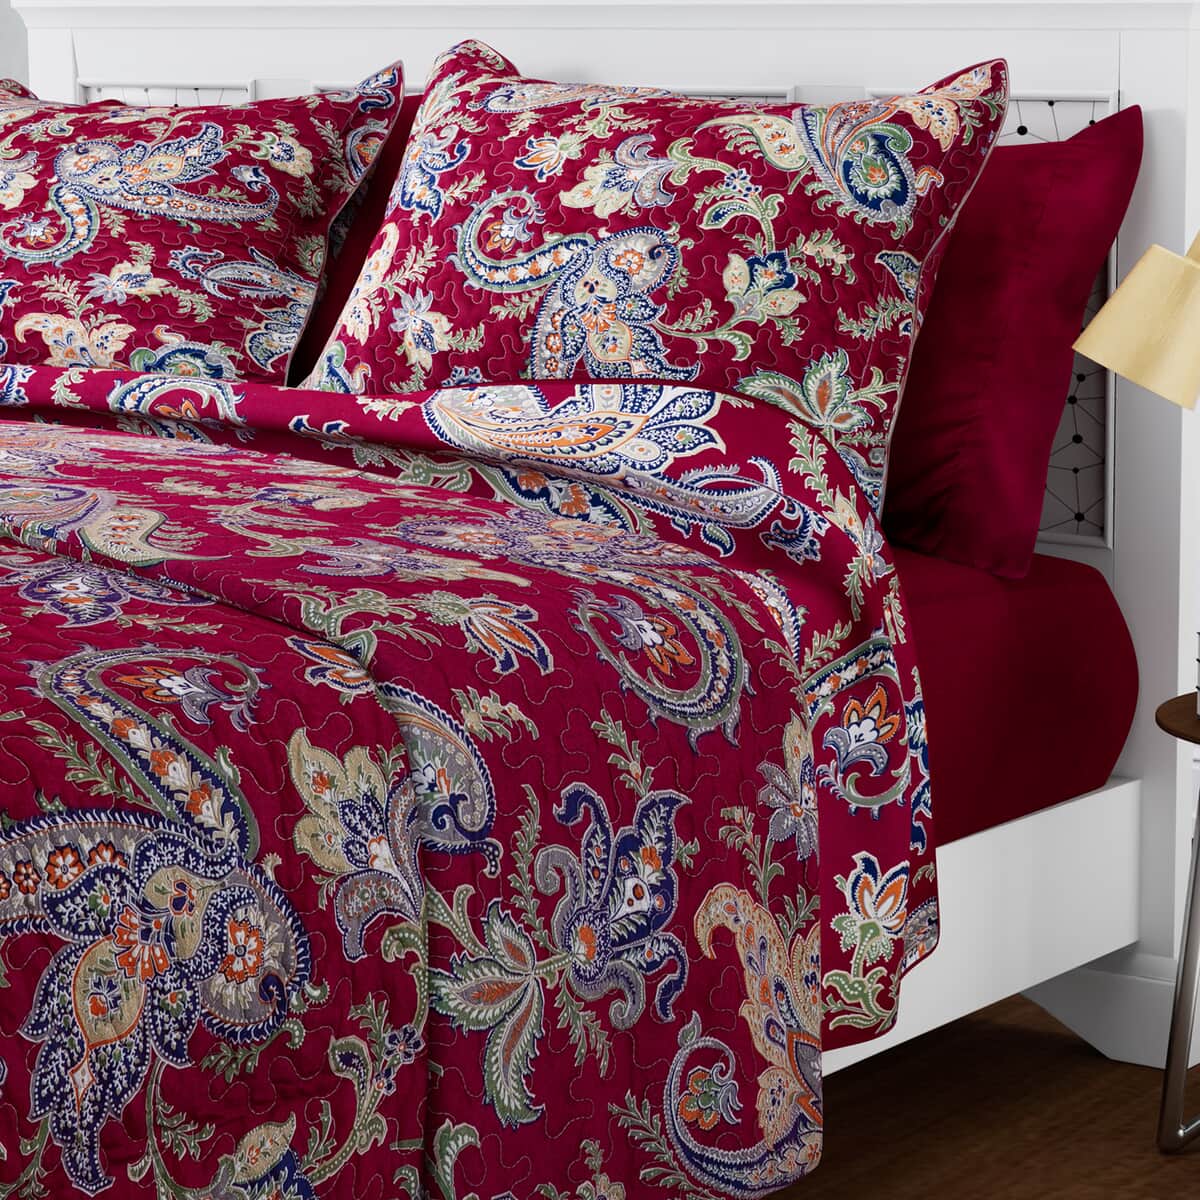 HOMESMART Burgundy Paisley Print 7pc Quilt and Sheet Set - Queen (100% Microfiber) image number 2